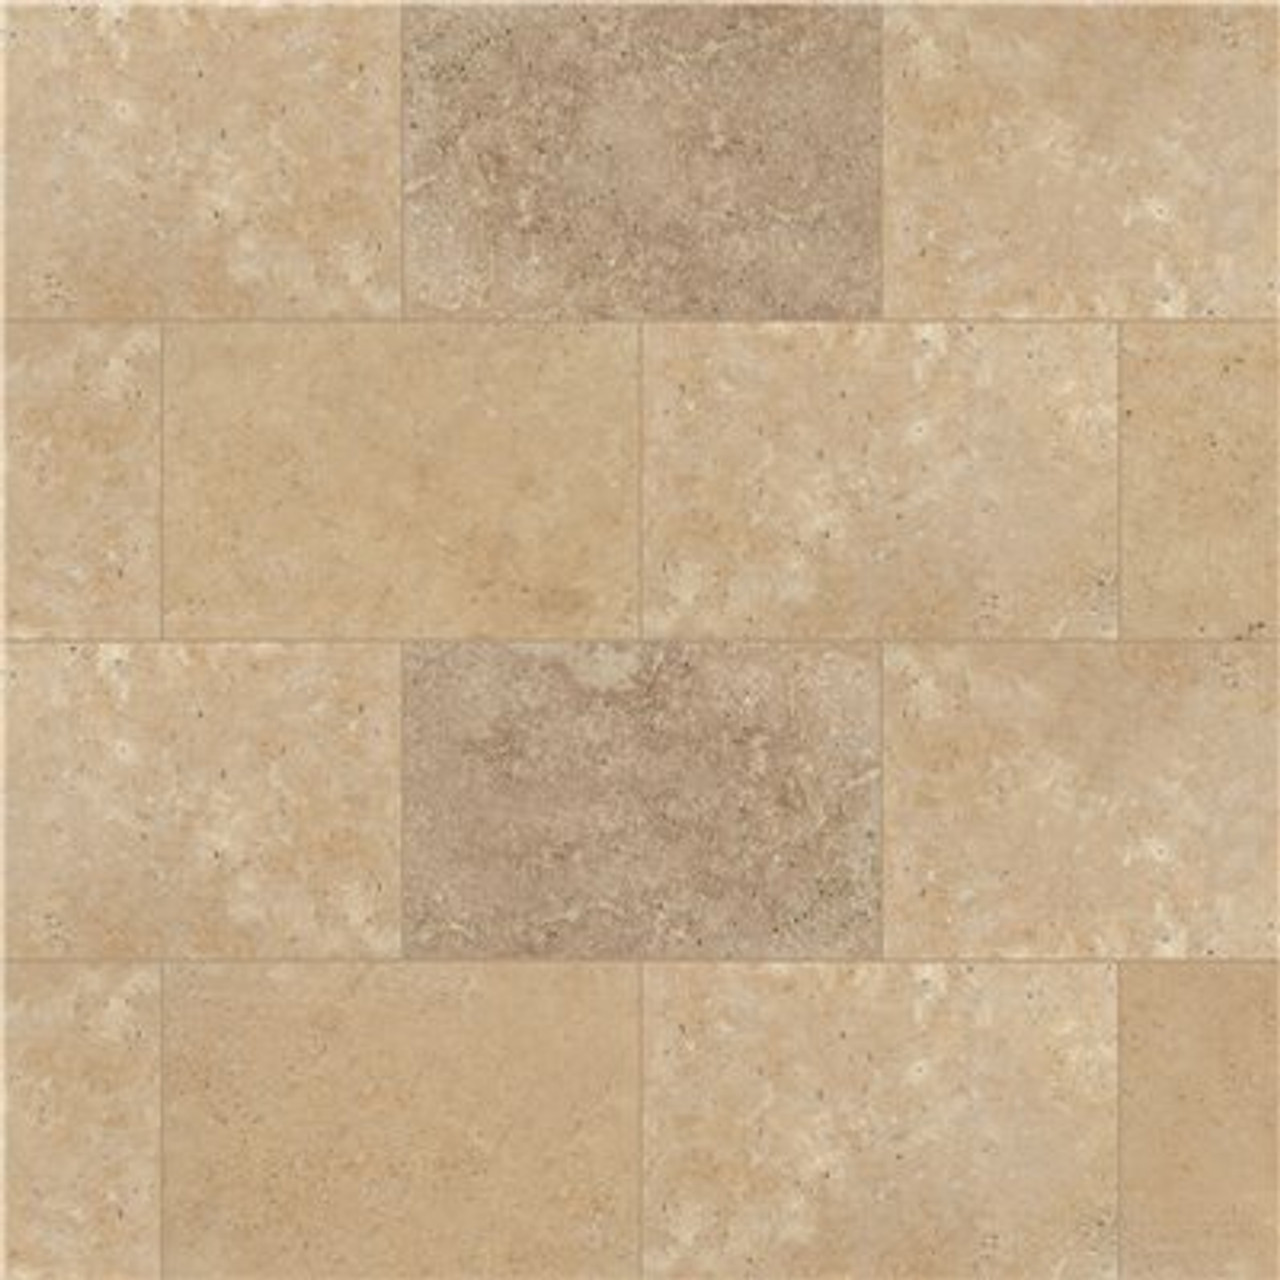 Msi Mediterranean Walnut 16 In. X 24 In. Rectangle Tan Travertine Paver Tile (15 Pieces/40.05 Sq. Ft./Pallet)